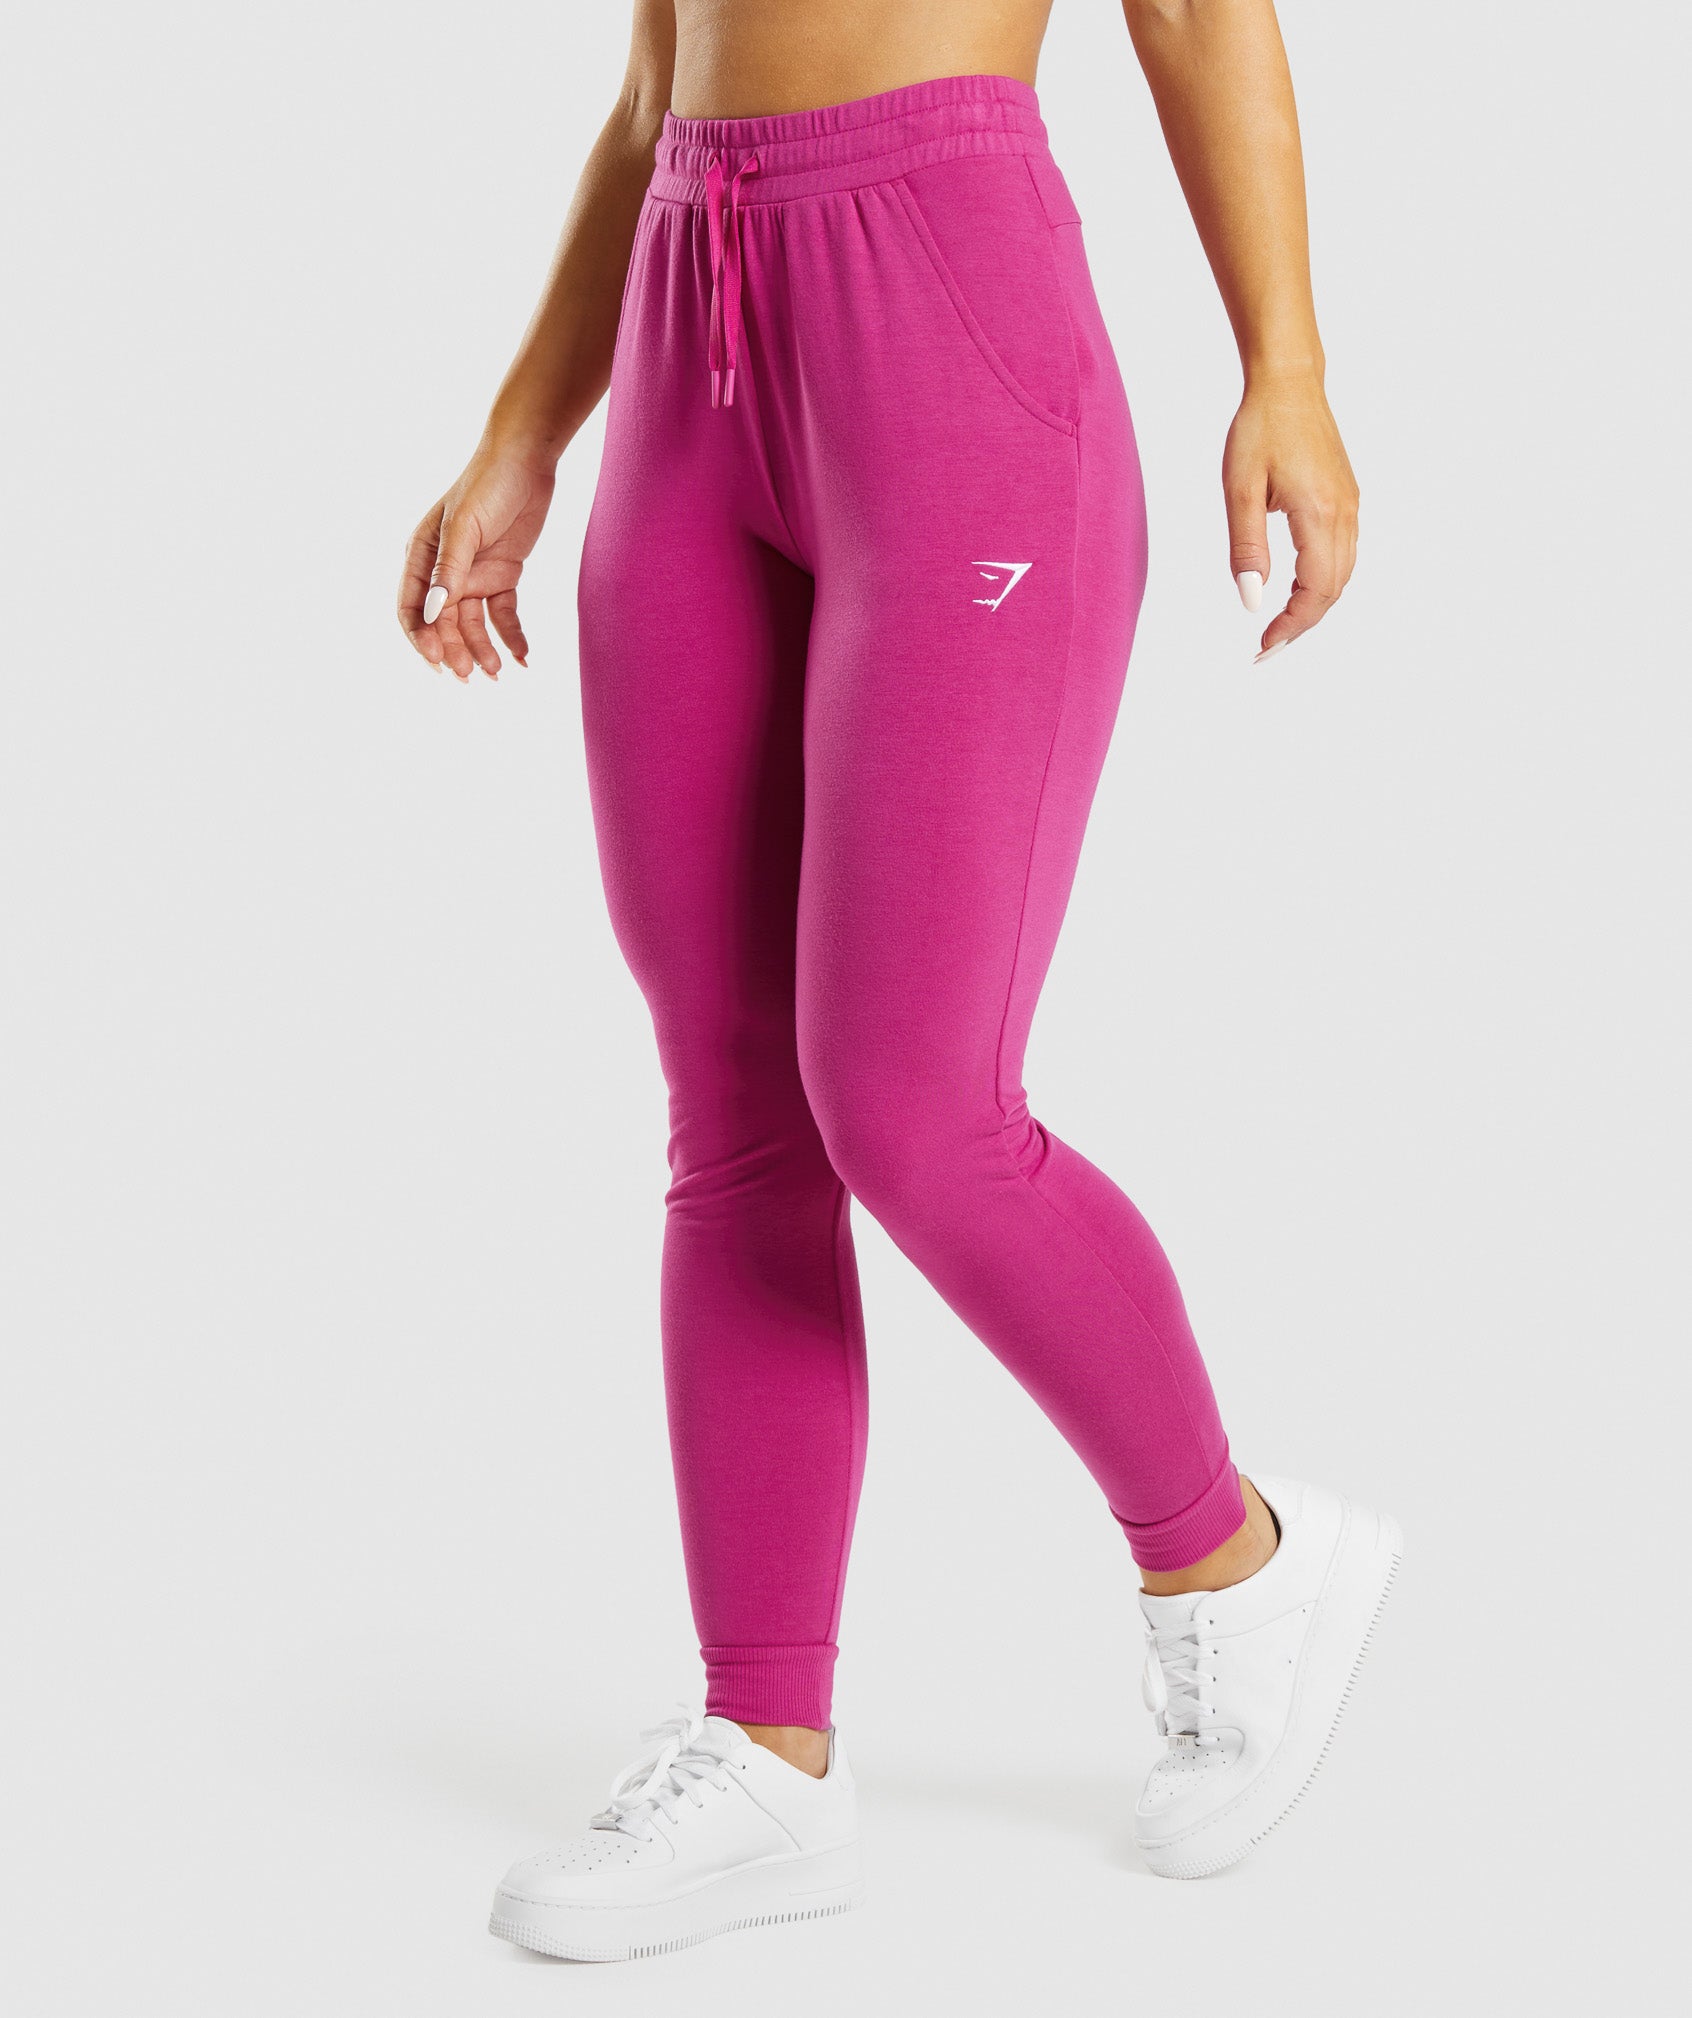 Training Pippa Joggers in Dragon Pink - view 1